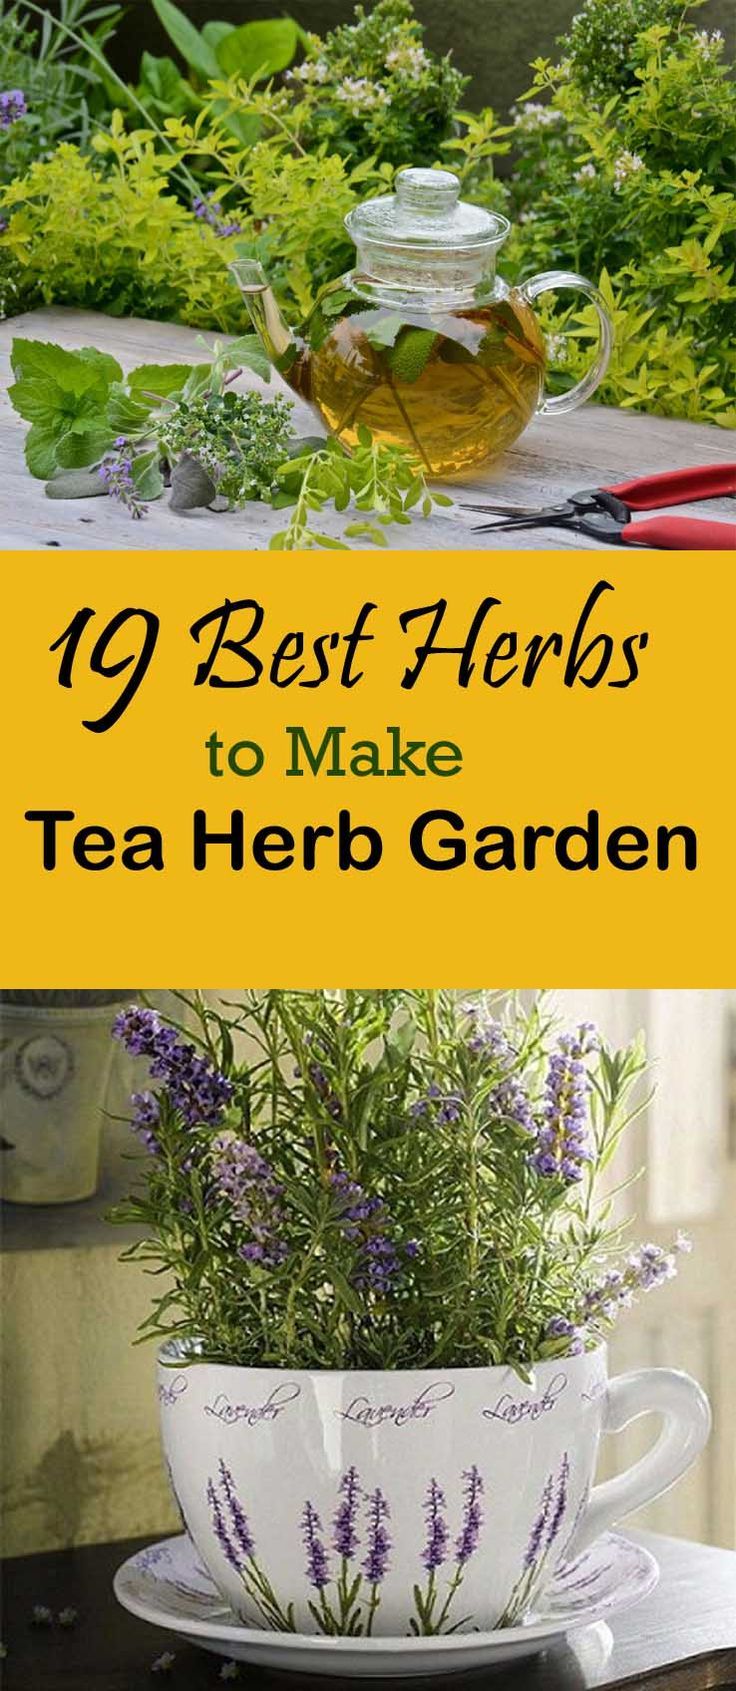 Like to sip herbal tea? Check out 19 Best Herbs To Make Tea Herb Garden...